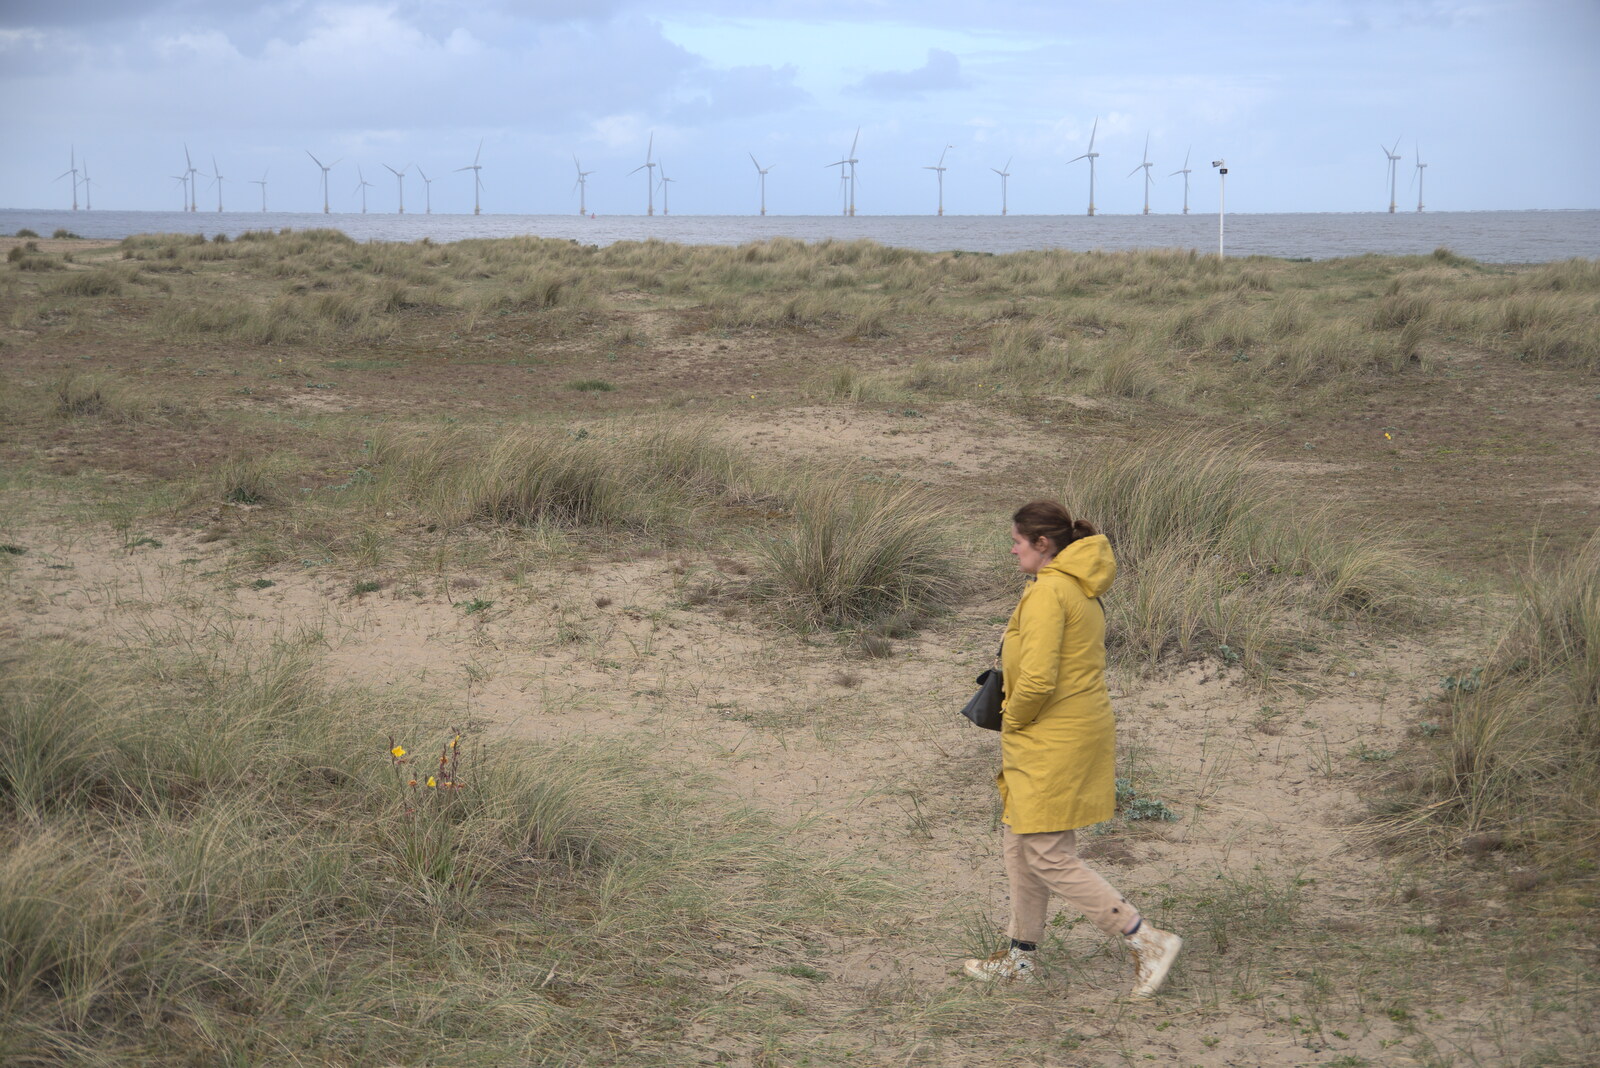 Isobel roams around the dunes from Faded Seaside Glamour: A Weekend in Great Yarmouth, Norfolk - 29th May 2022